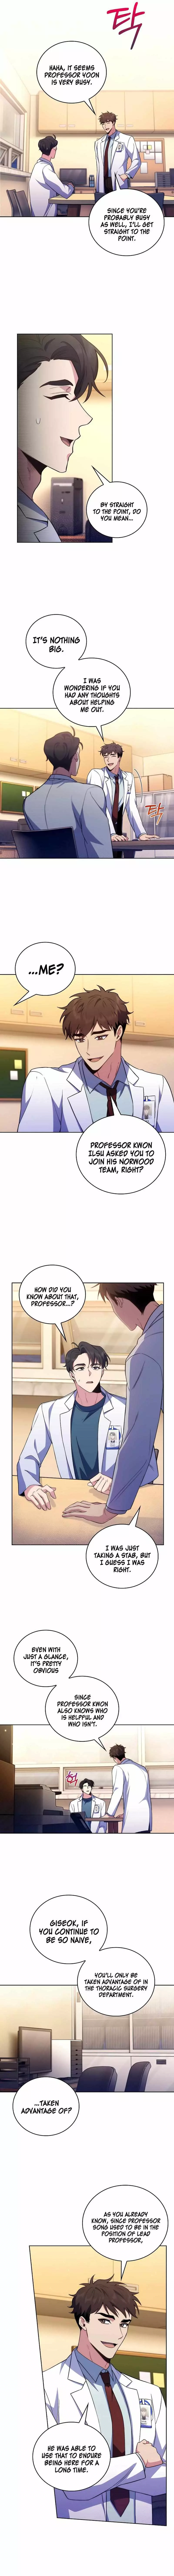 Level-Up Doctor (Manhwa) - 63 page 6-9fb91556